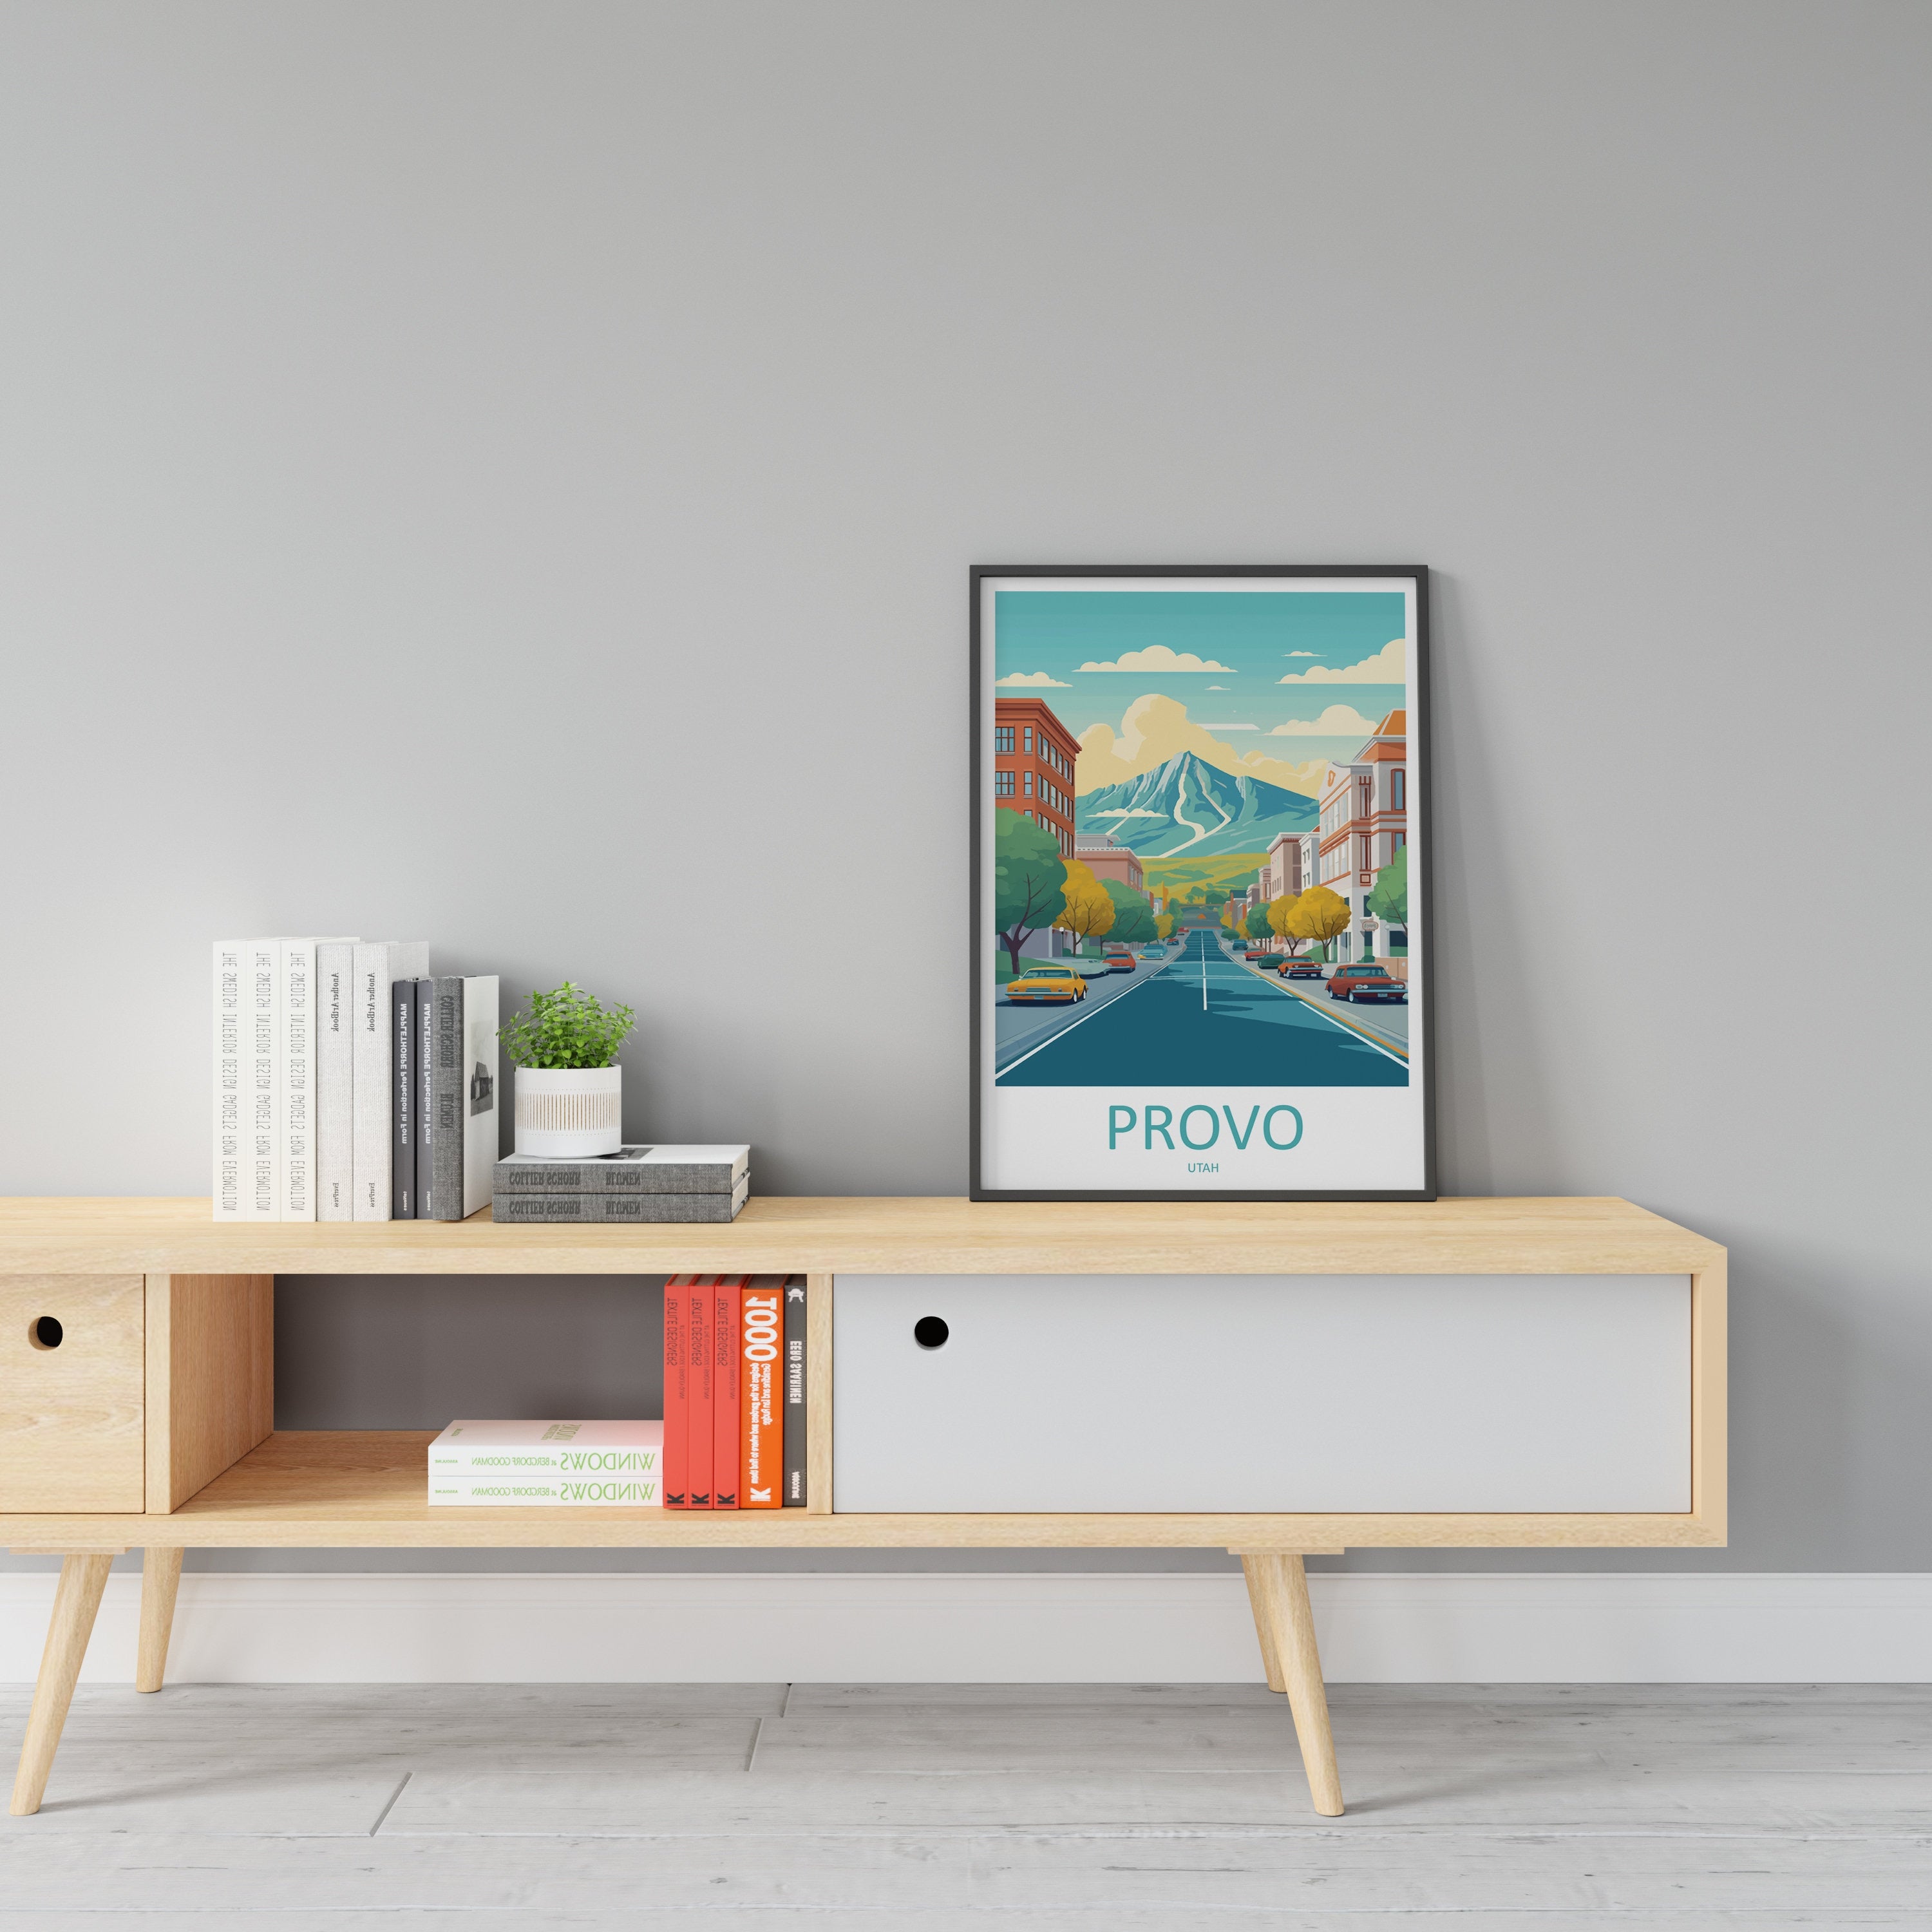 Provo Travel Print Wall Art Provo Wall Hanging Home Décor Provo Gift Art Lovers Utah Art Lover Gift Travel Posters Wall Art